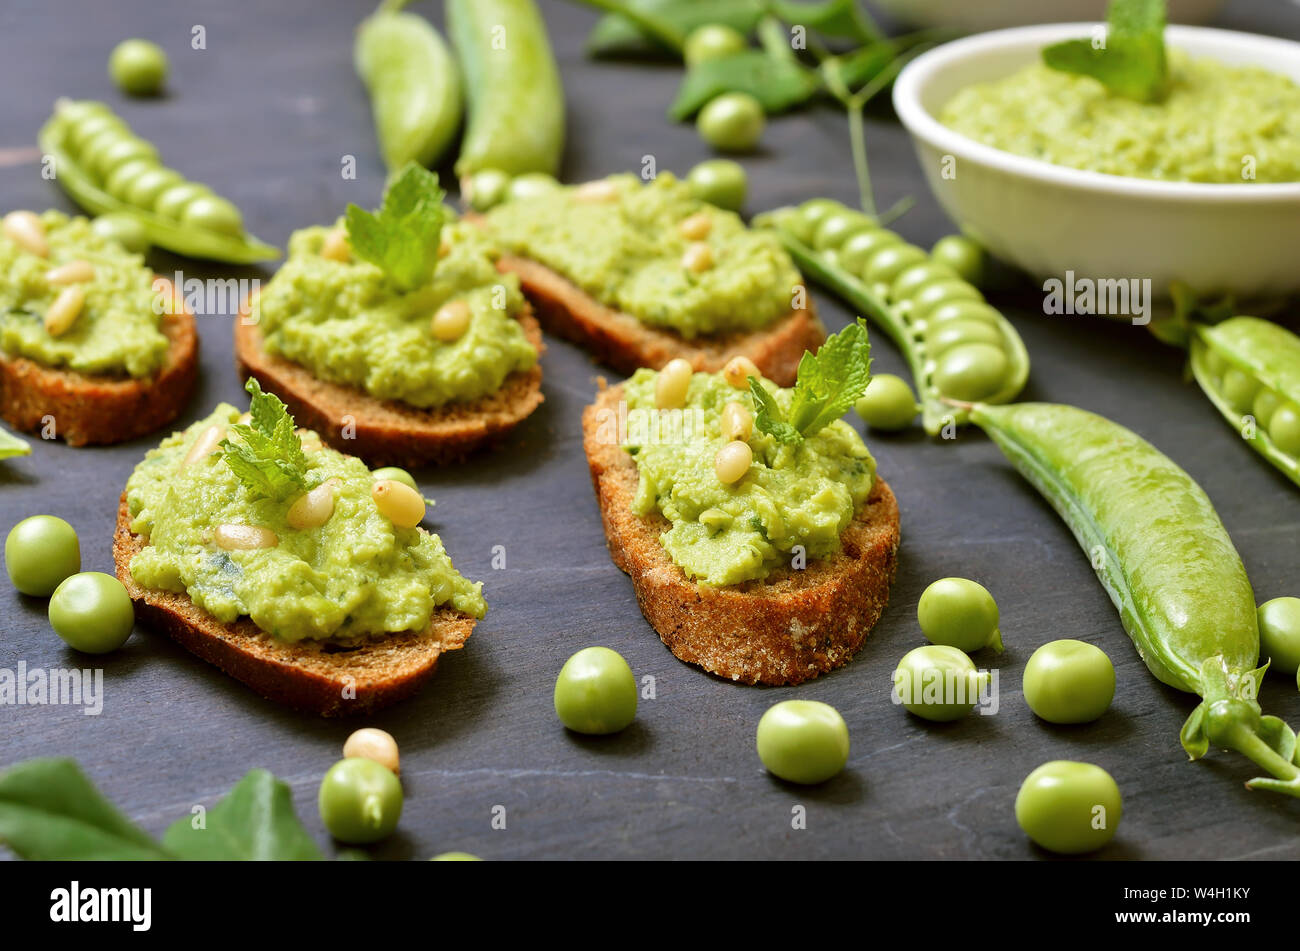 Sandwiches with pesto sauce and pine nuts. Fresh green peas, close up Stock Photo